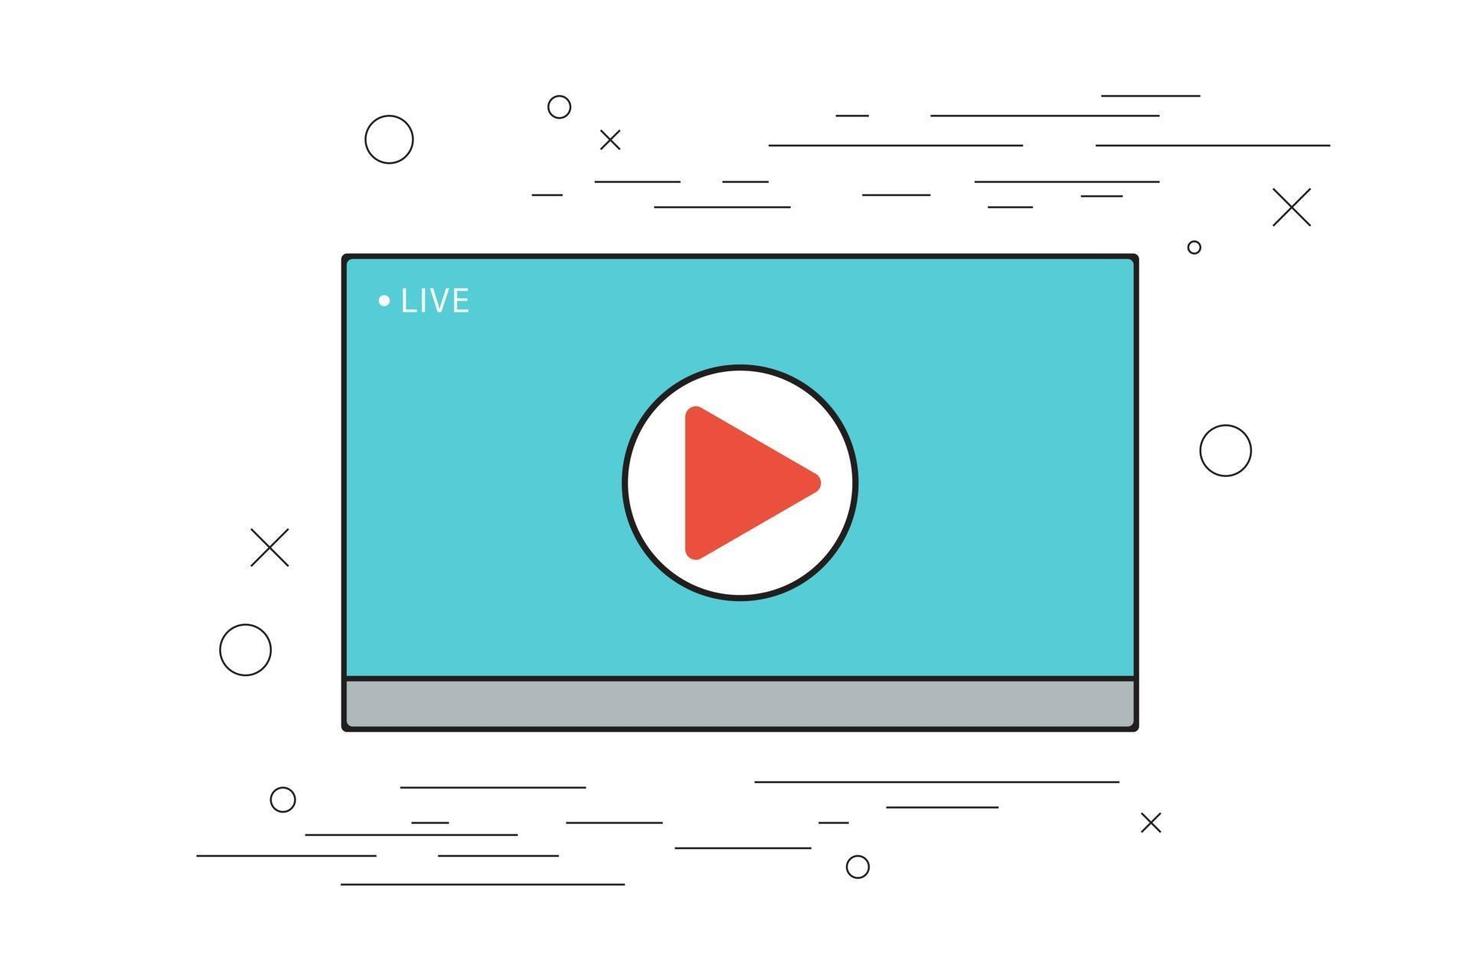 Live stream red vector design element with play button